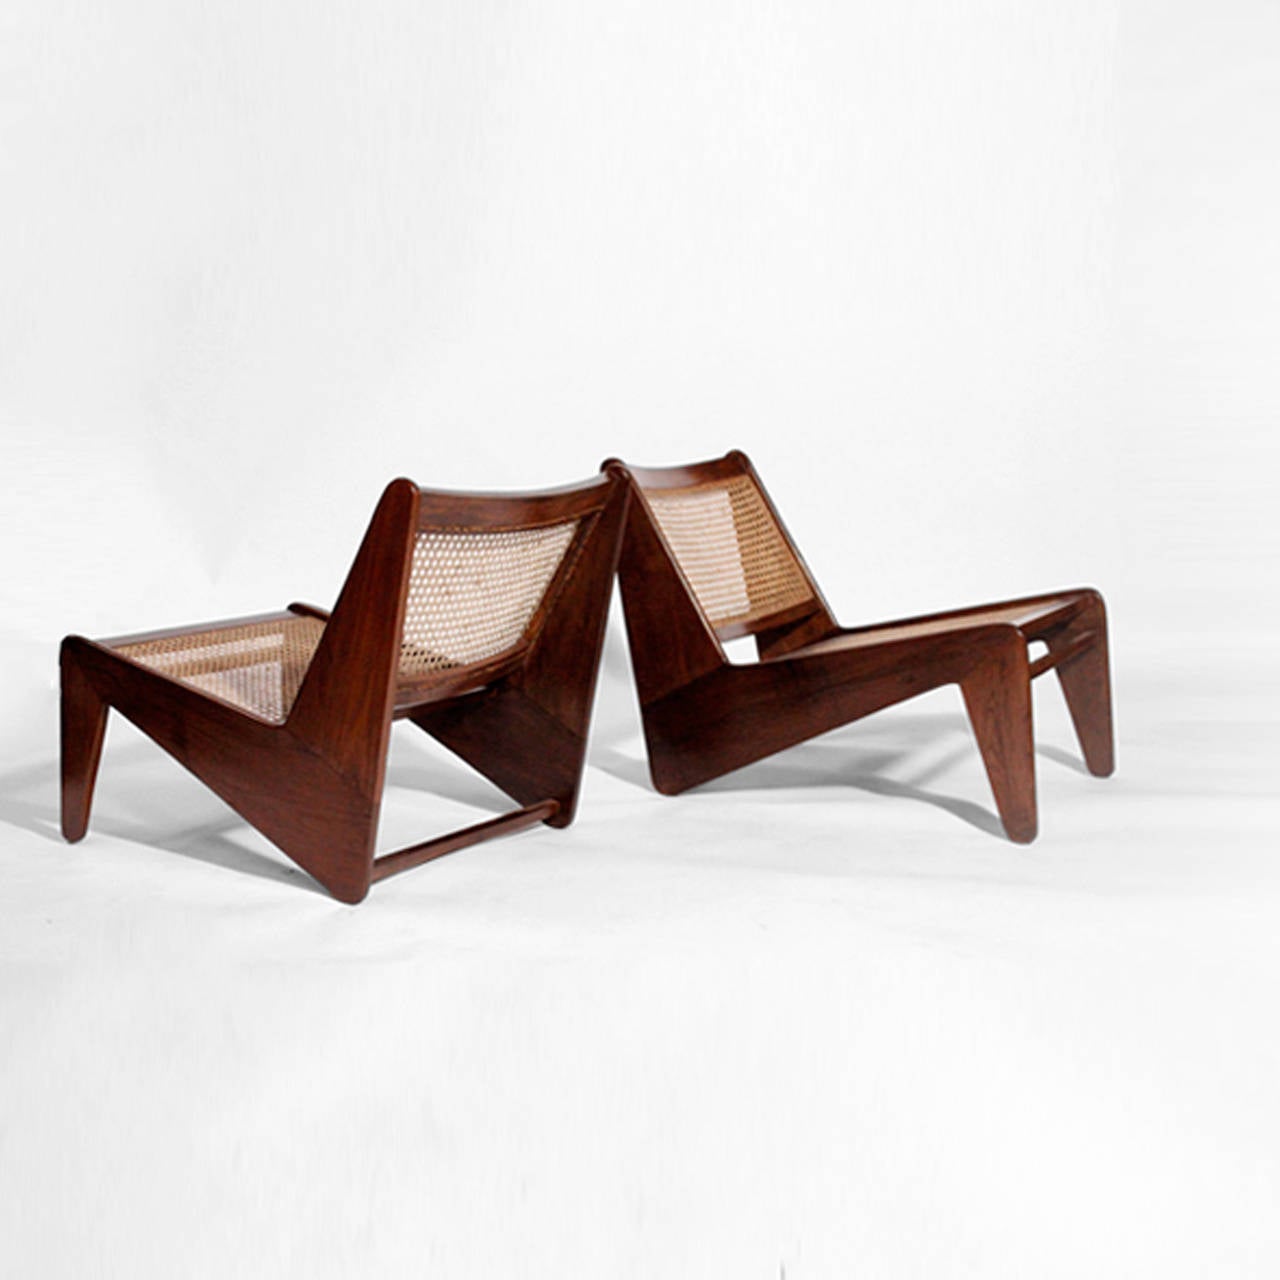 Kangaroo Chair designed by Pierre Jeanneret for the famous modernist capital city of Chandigarh which was entirely designed by Le Corbusier and Jeanneret made in solidwood and covered in palisandro and cane.